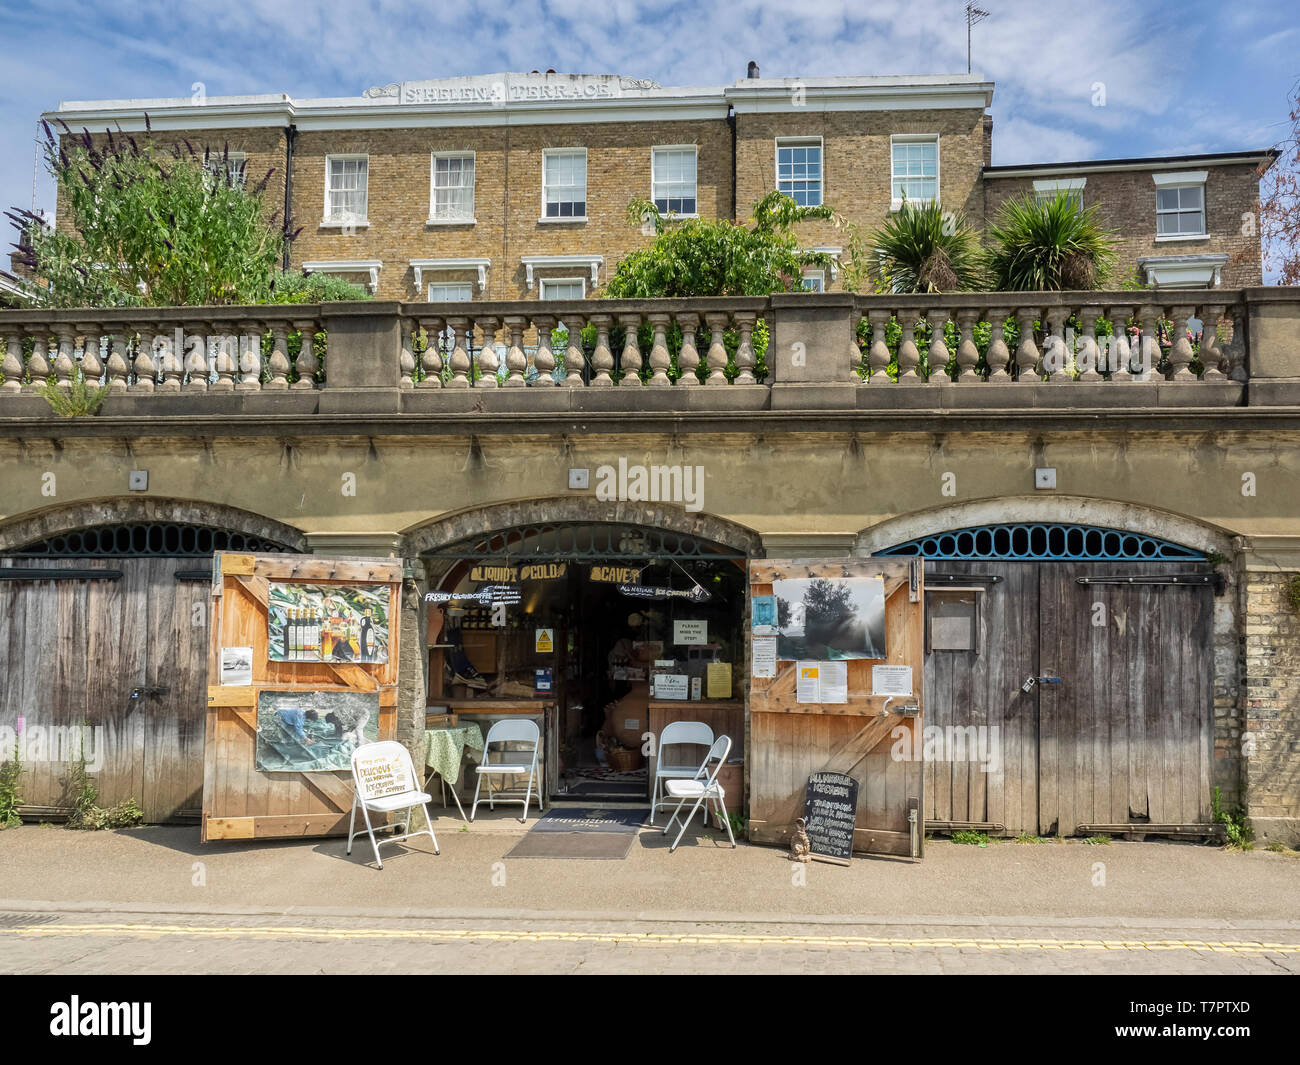 RICHMOND-UPON-THAMES, LONDON, UK - JULY 04, 2018:  Boathouse on Buccleuch Passage that has been converted to small Cafe Stock Photo